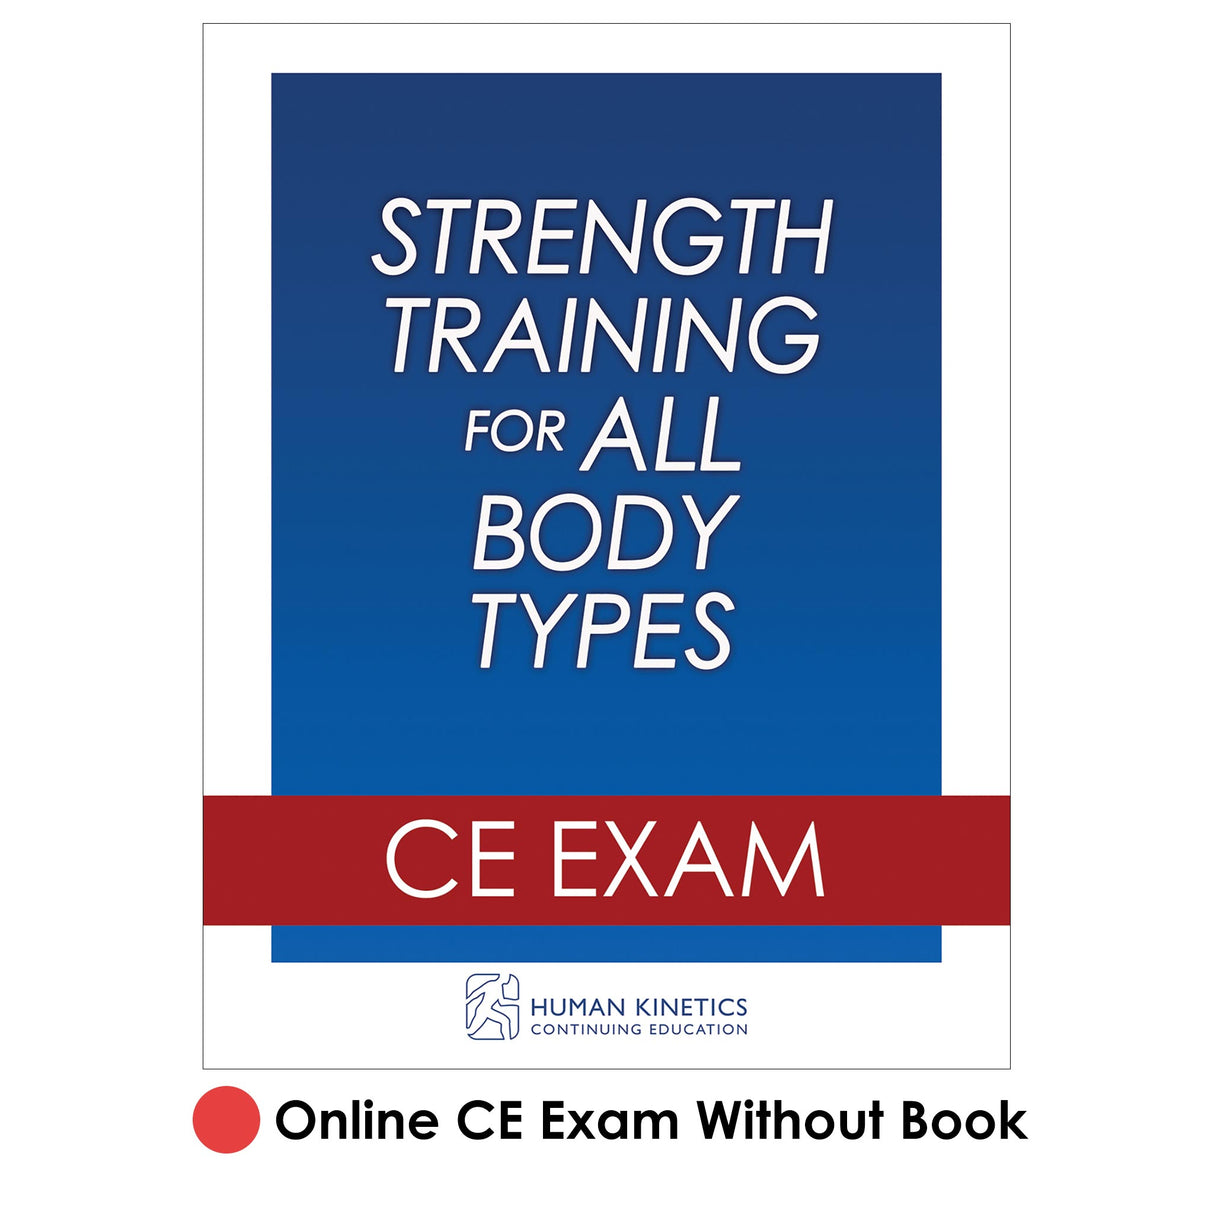 Strength Training for All Body Types Online CE Exam Without Book